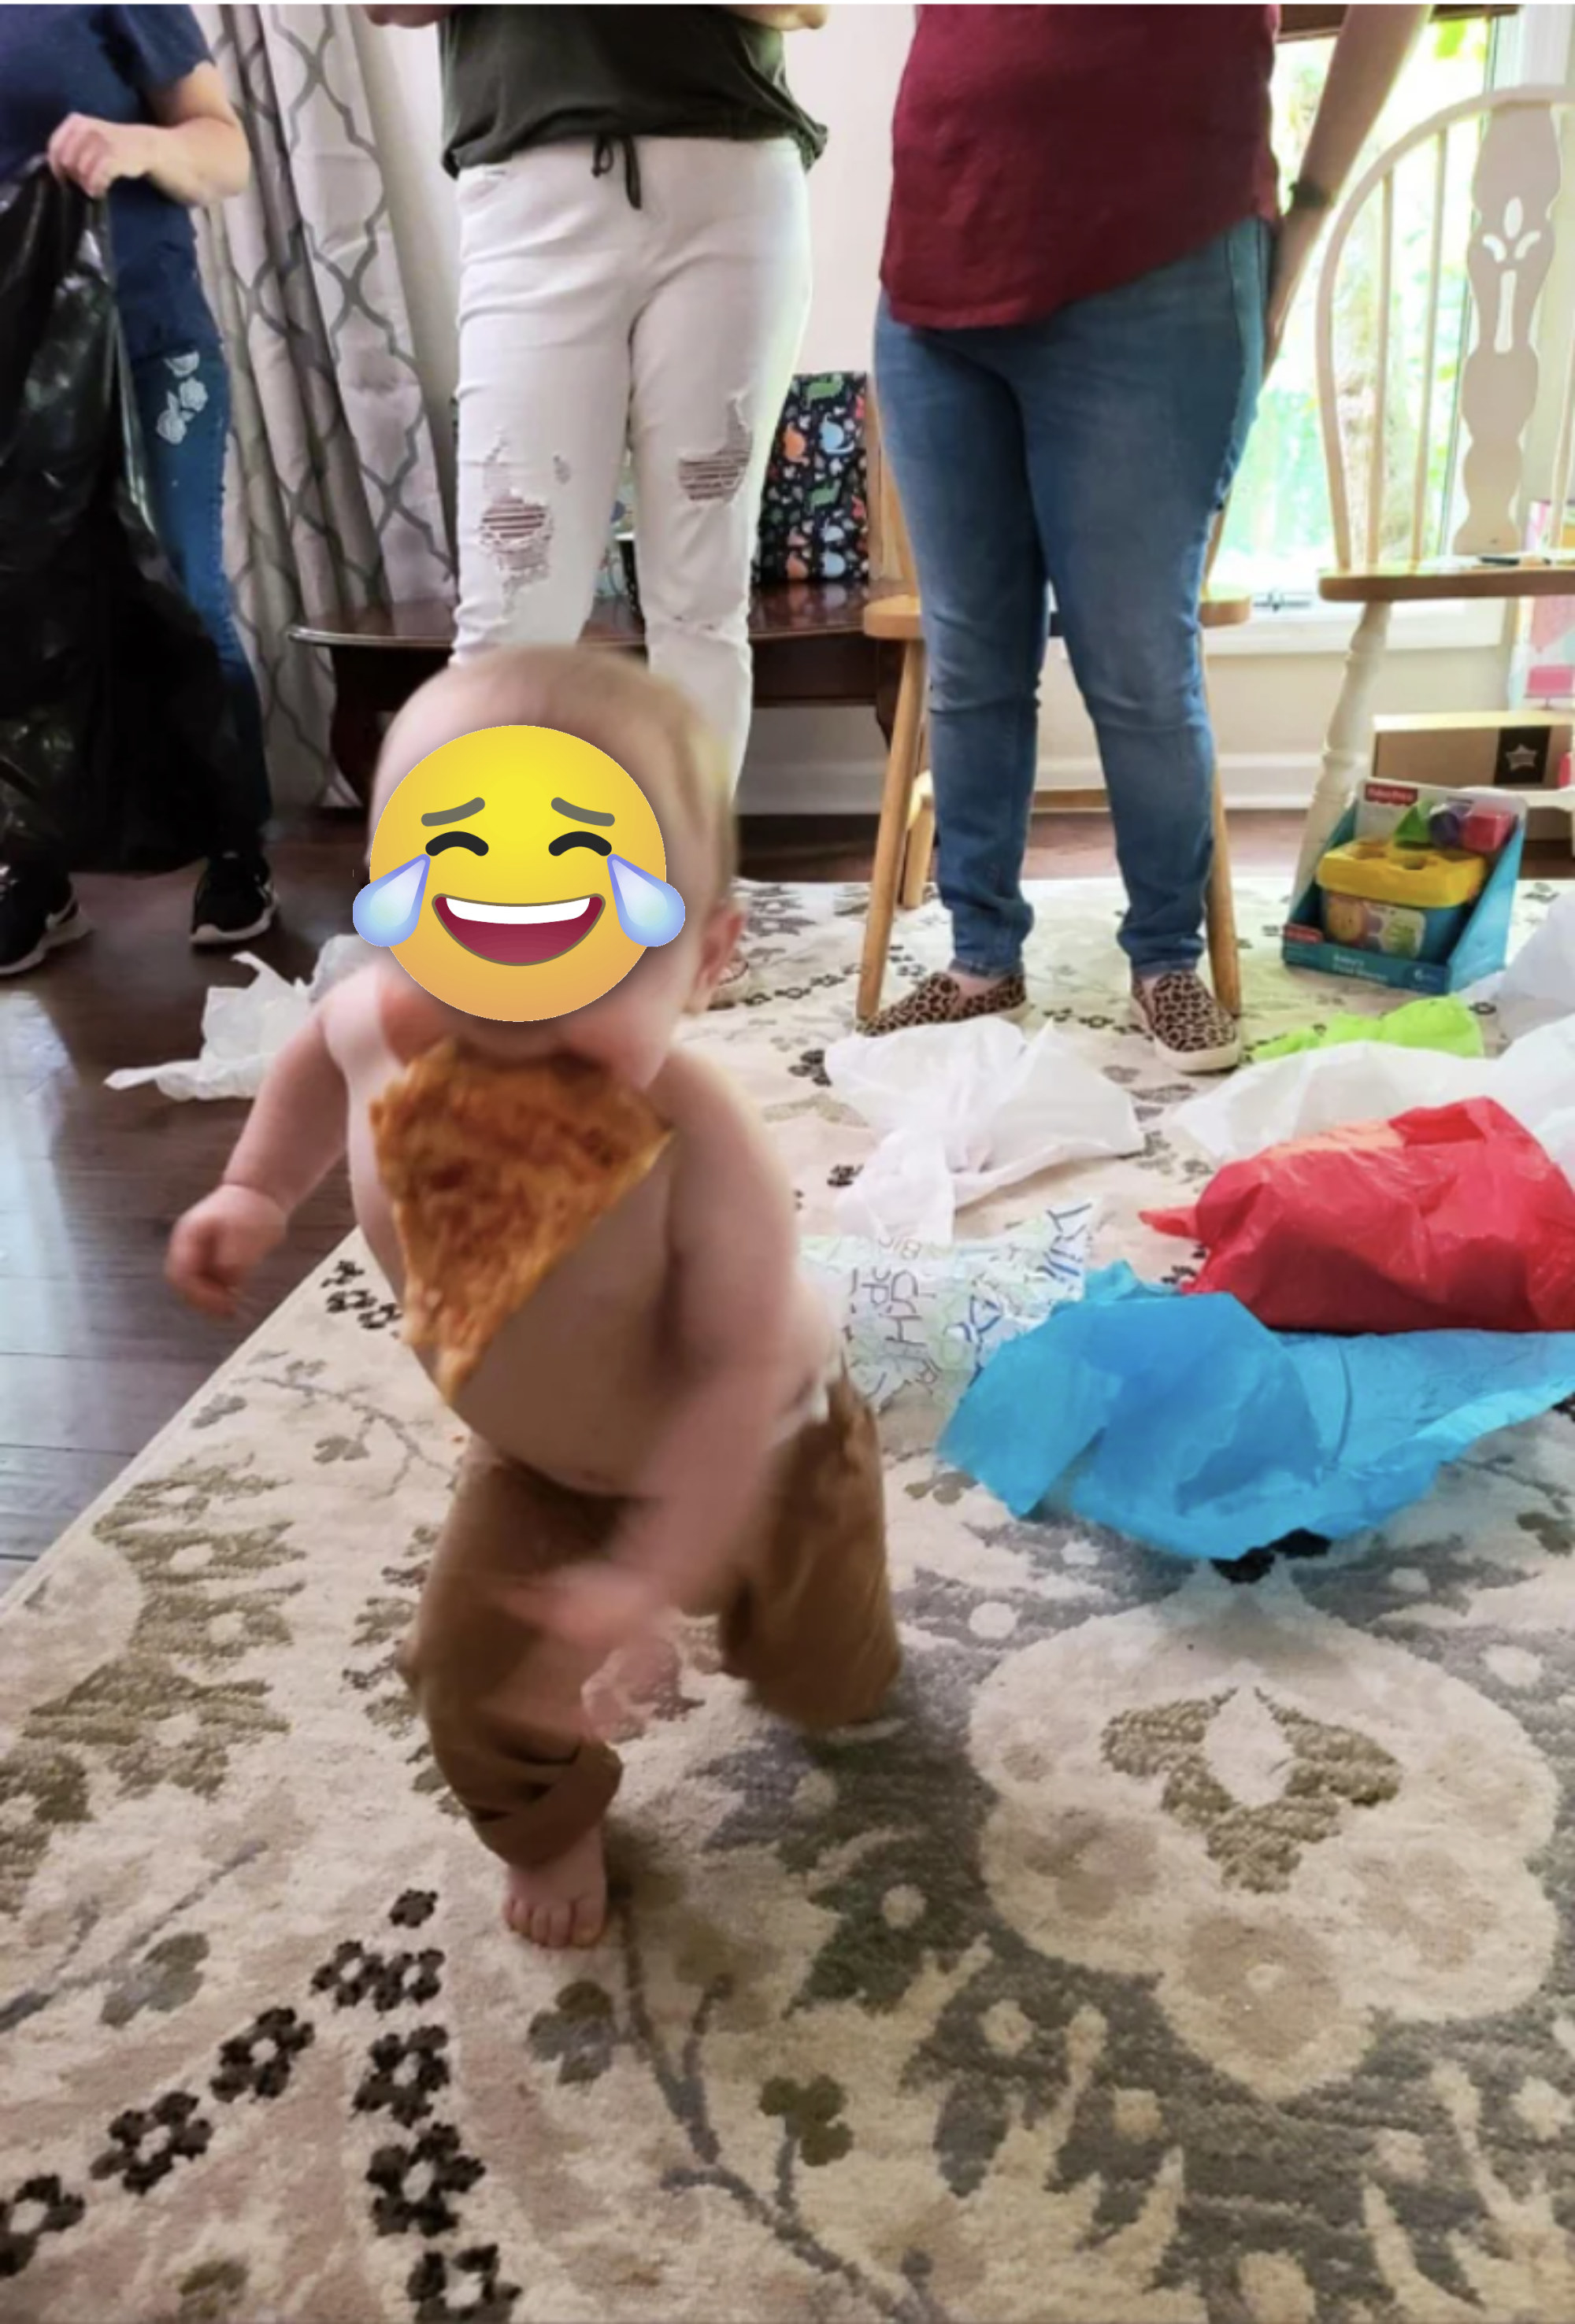 A toddler runs away with a slice of pizza in his mouth